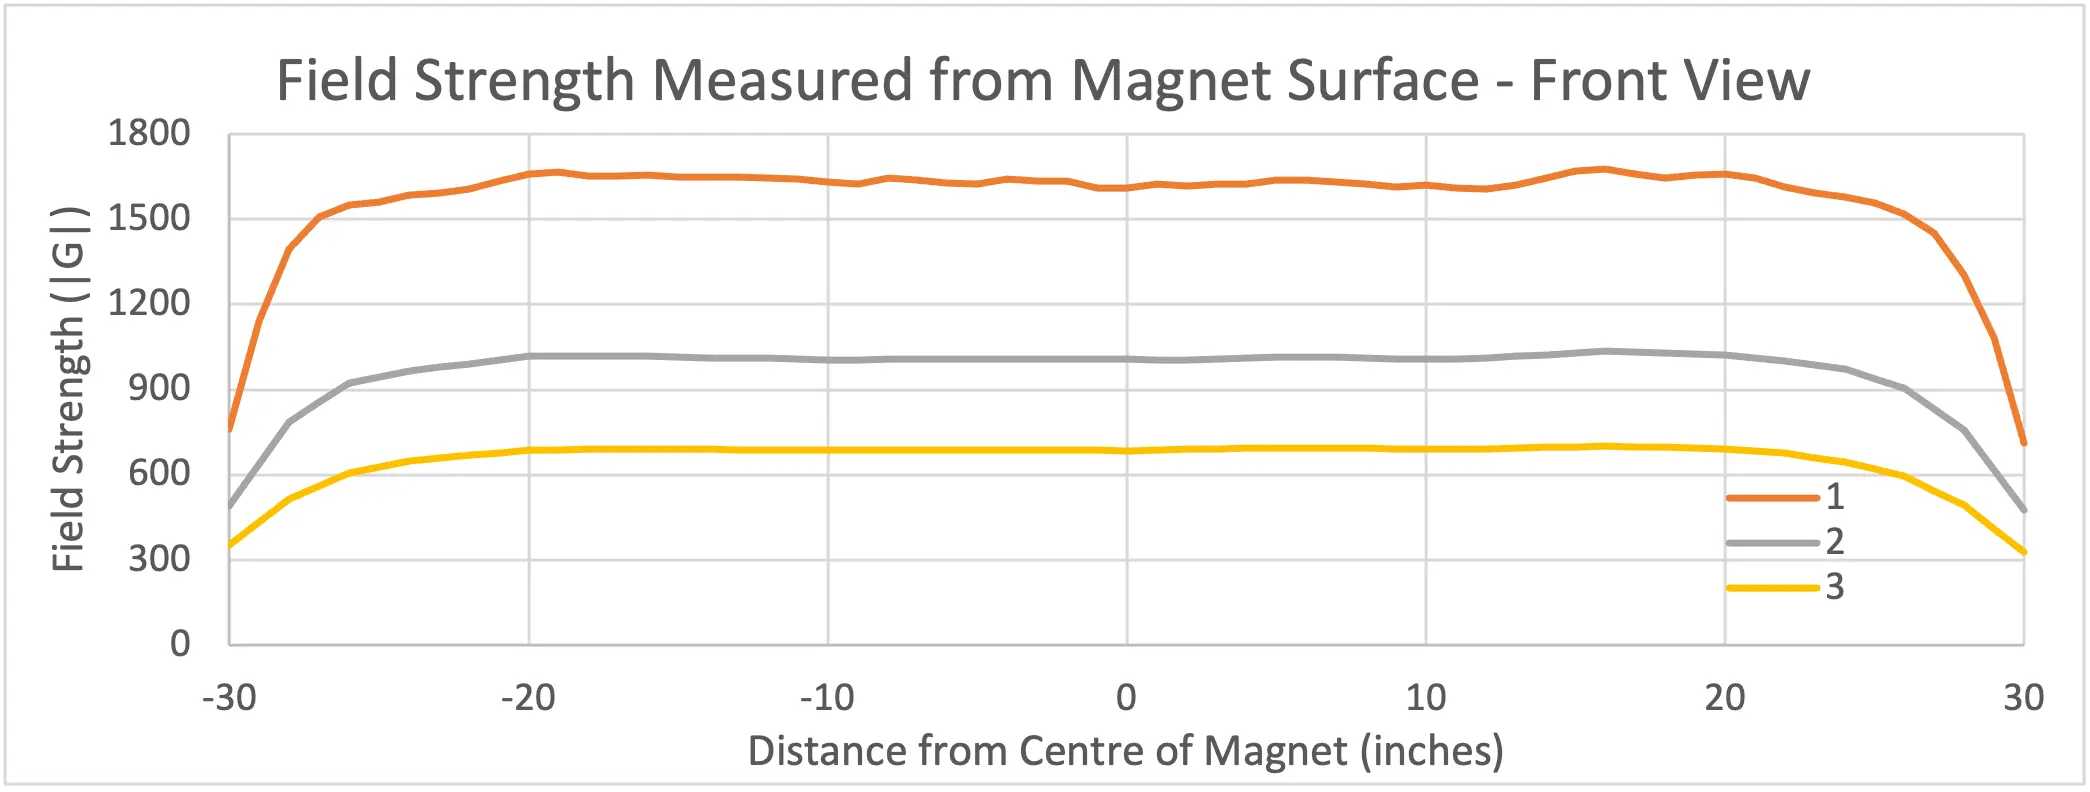 Seeker - Field Strength Measured From Magnet Surface - Front View